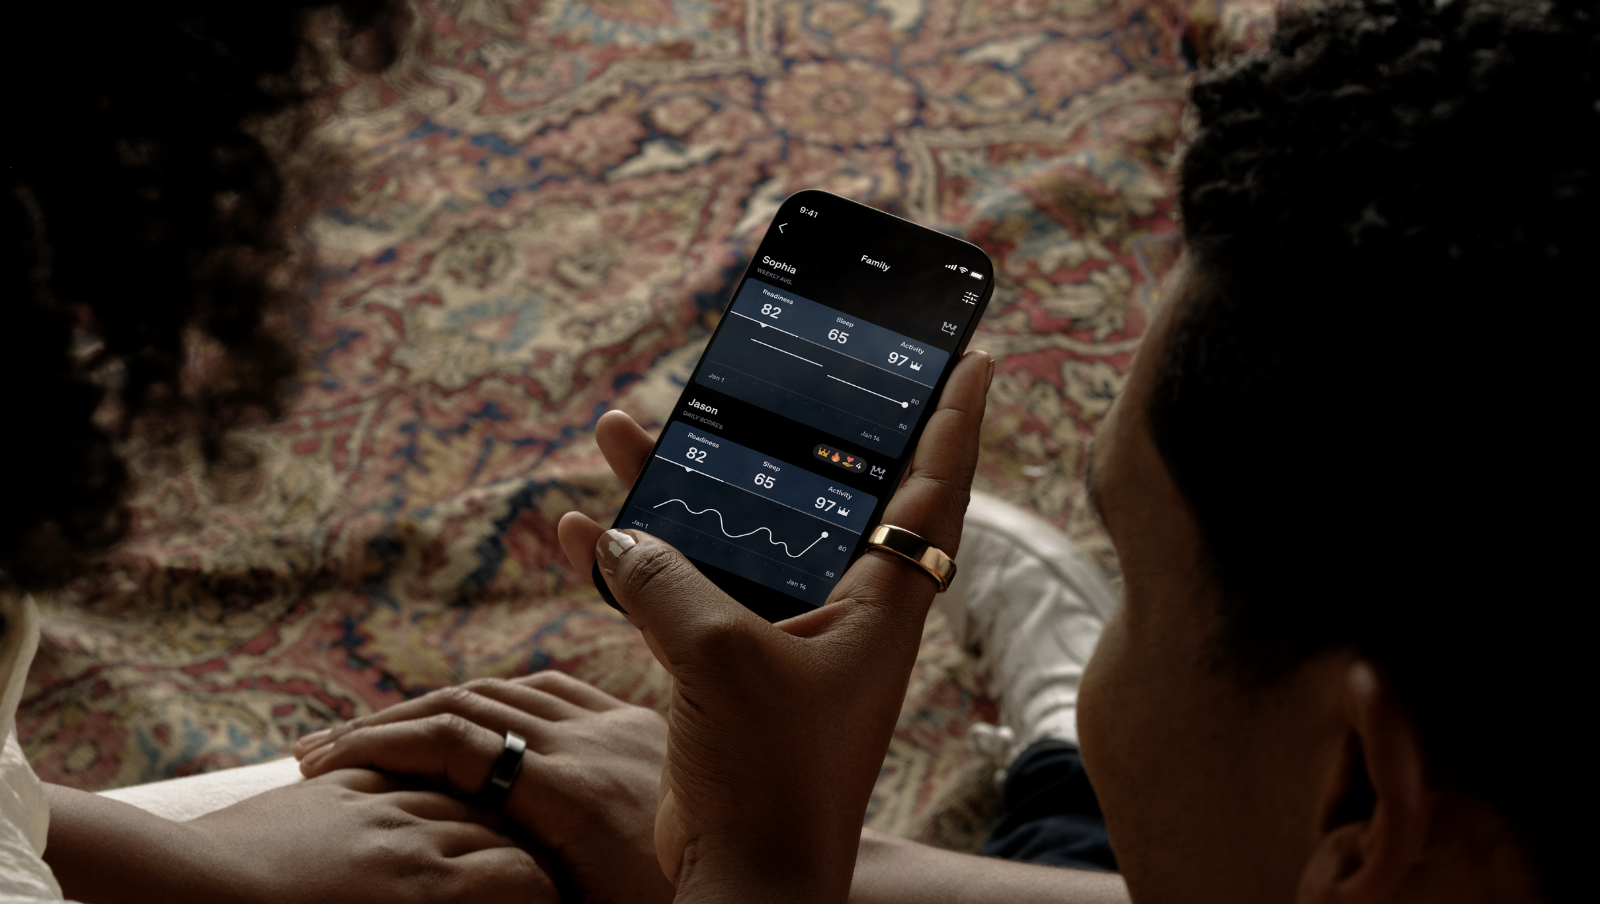 Oura launches new ‘Circles’ social feature to share your personal health journey